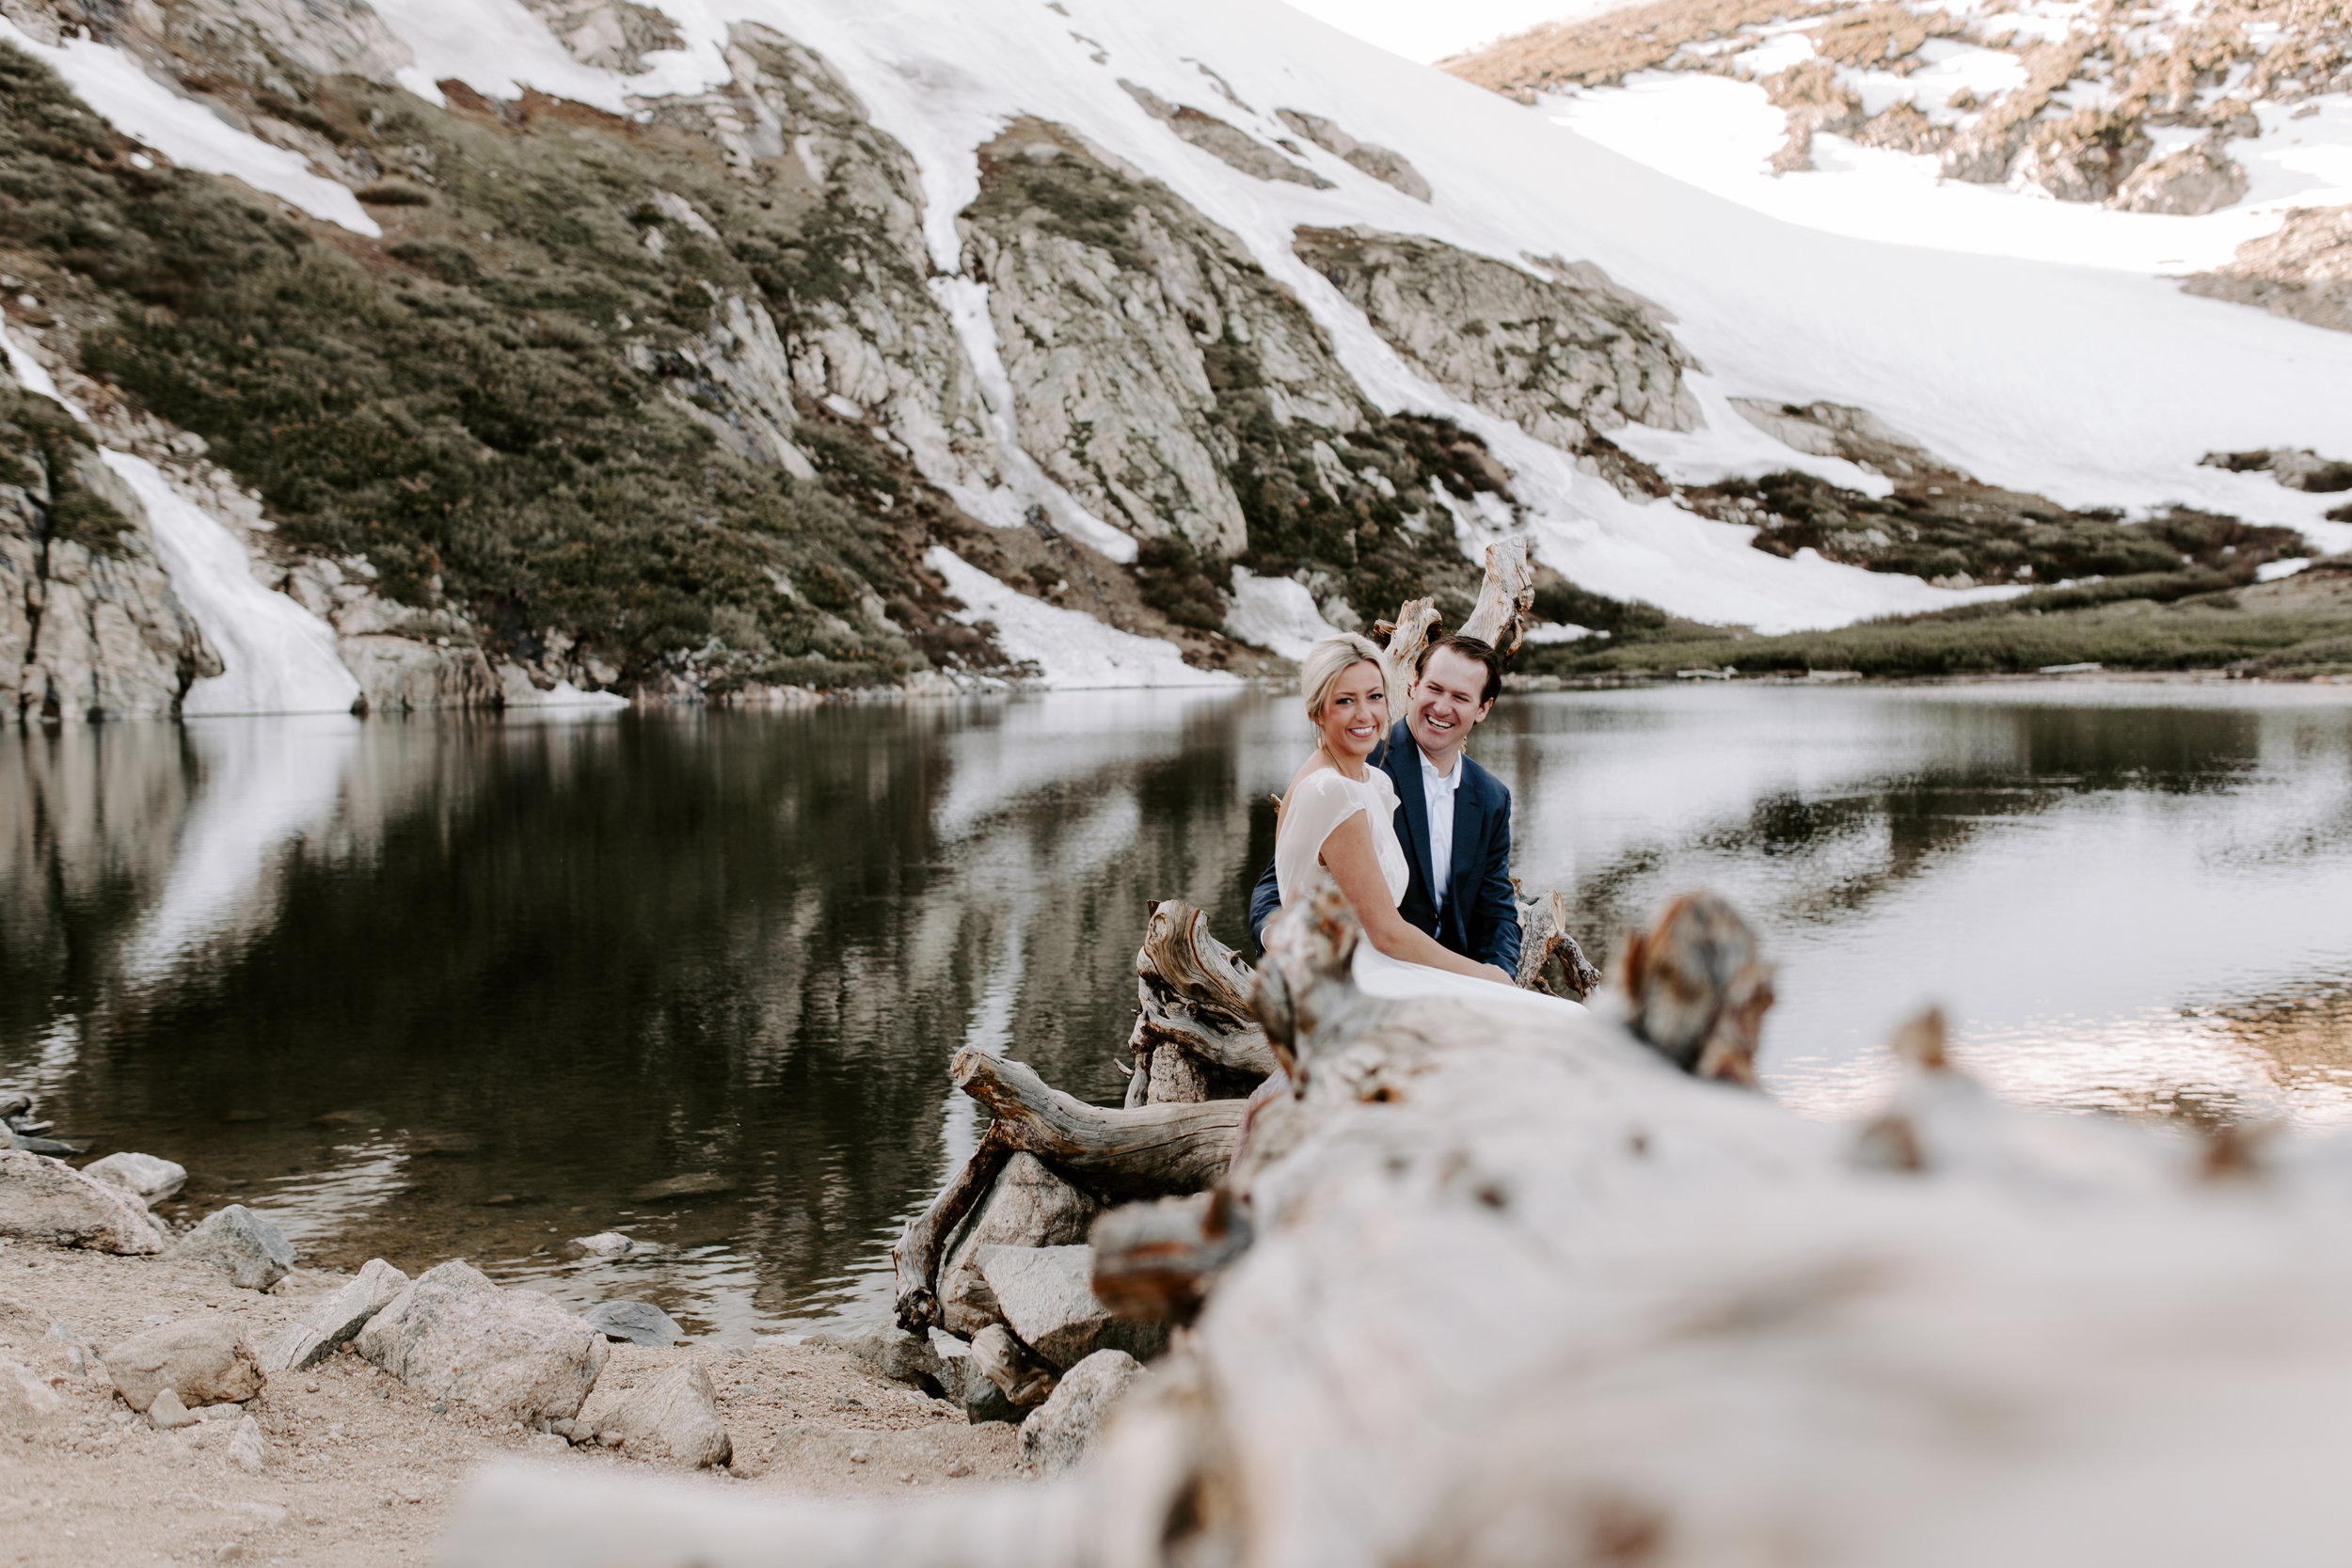 Saint Mary’s-Alice St Mary’s Glacier elopement in the Colorado Rocky Mountains with Wedding Photographer Diana Coulter